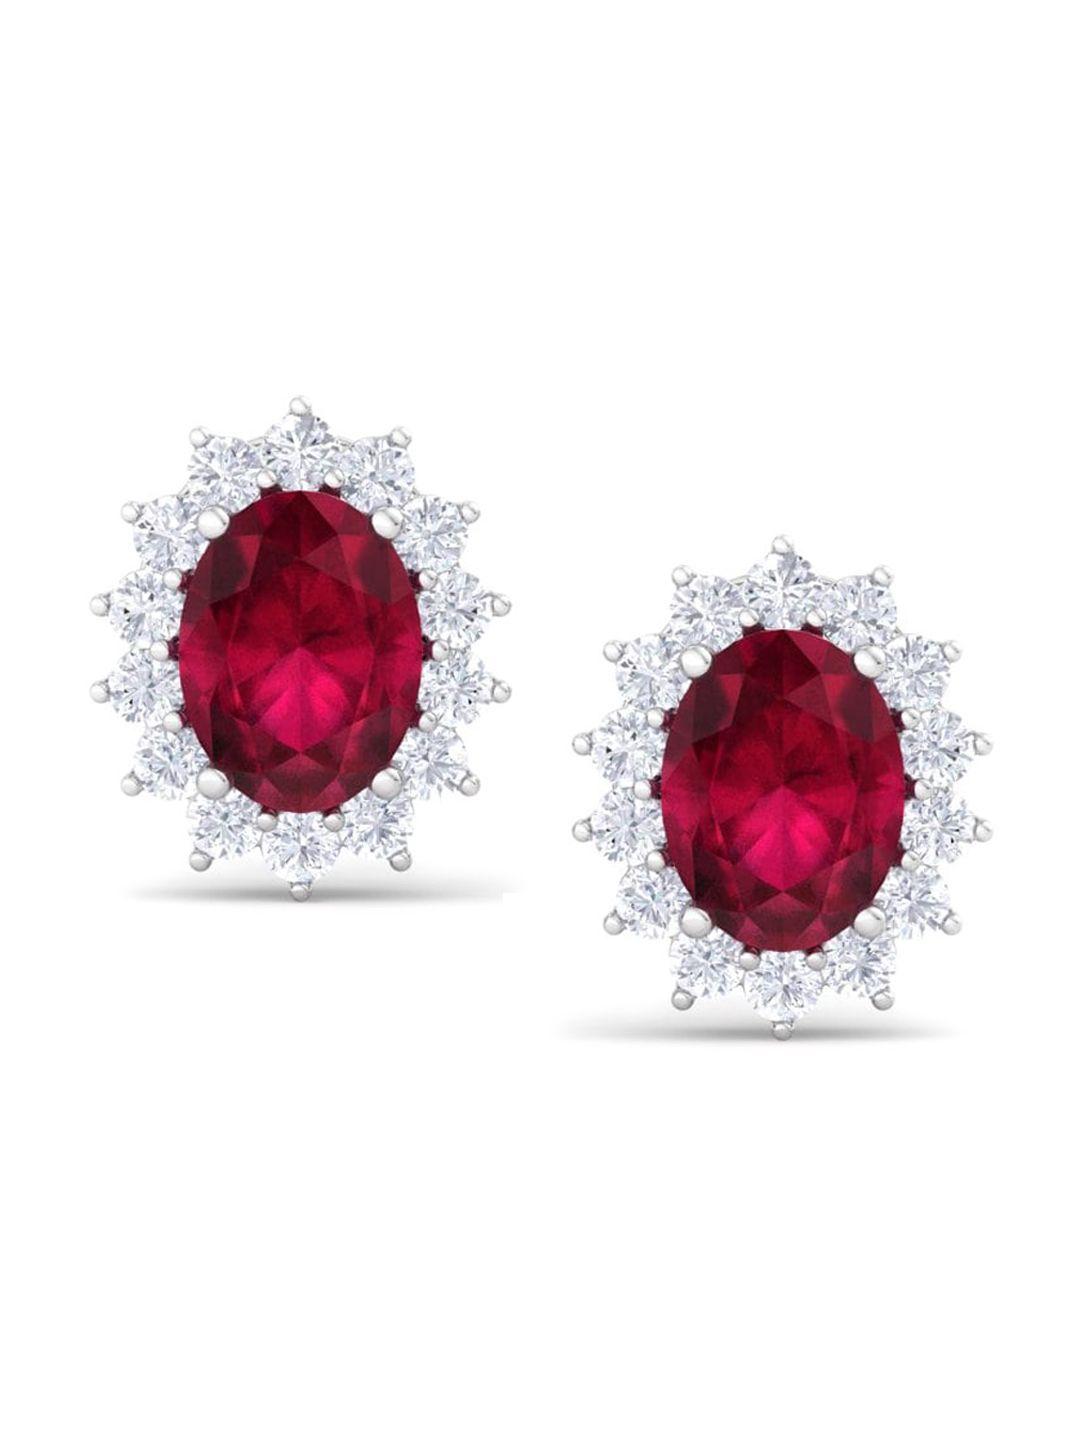 inddus jewels rhodium-plated 92.5 sterling silver studs earrings